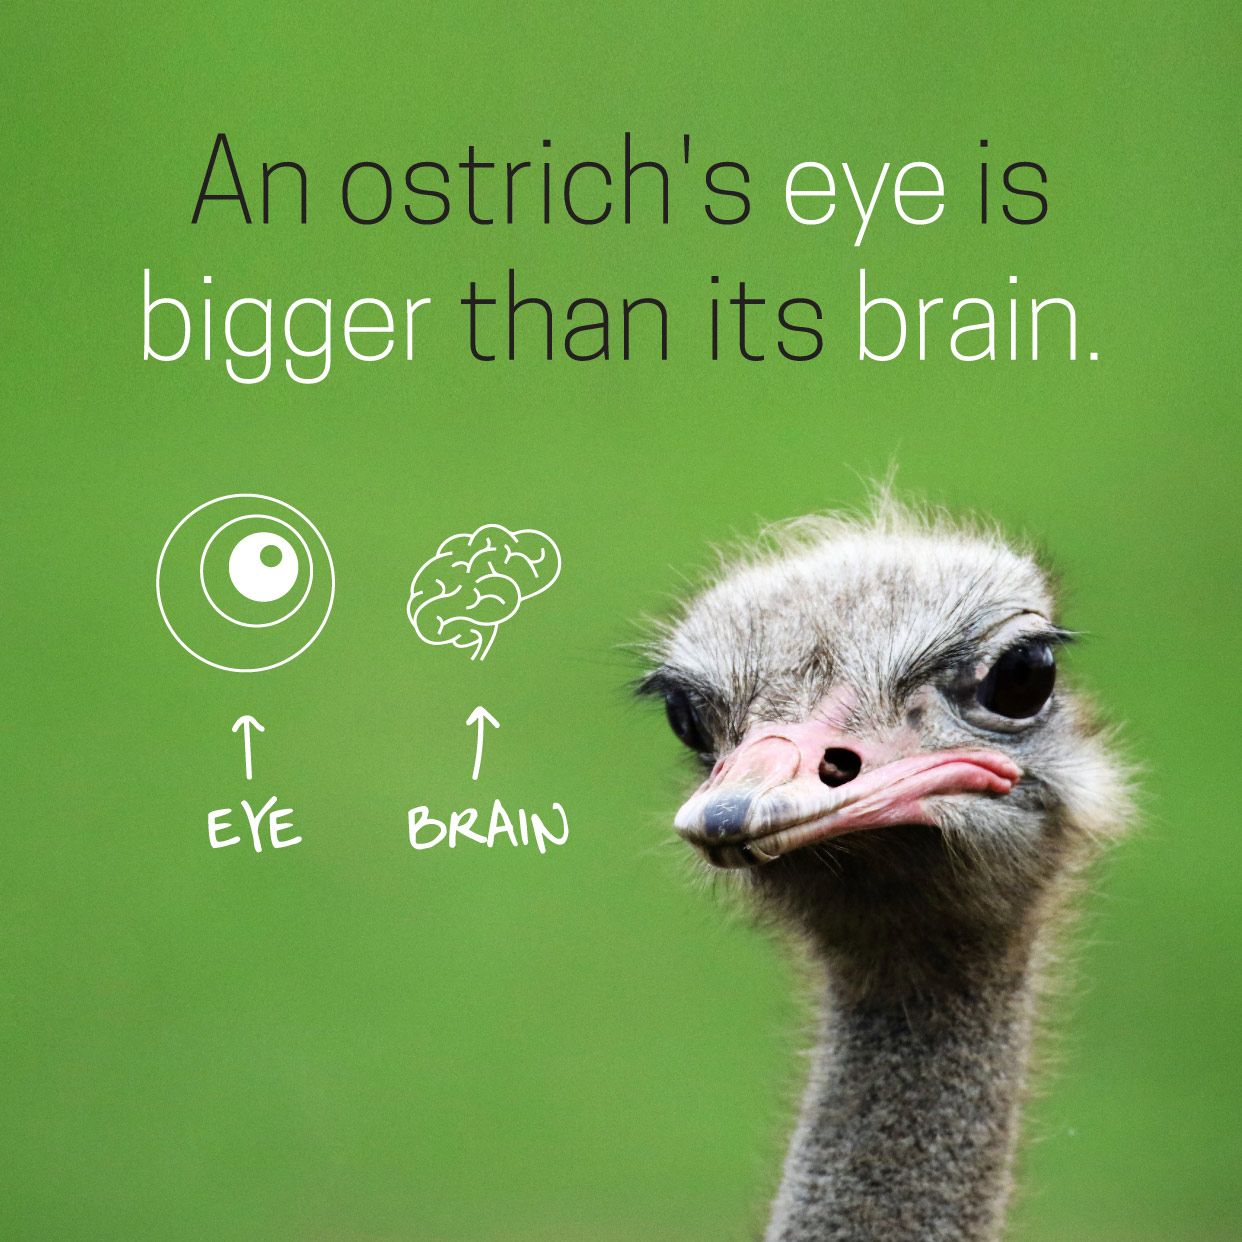 Do you know that an ostrich's eye is bigger than its brain?